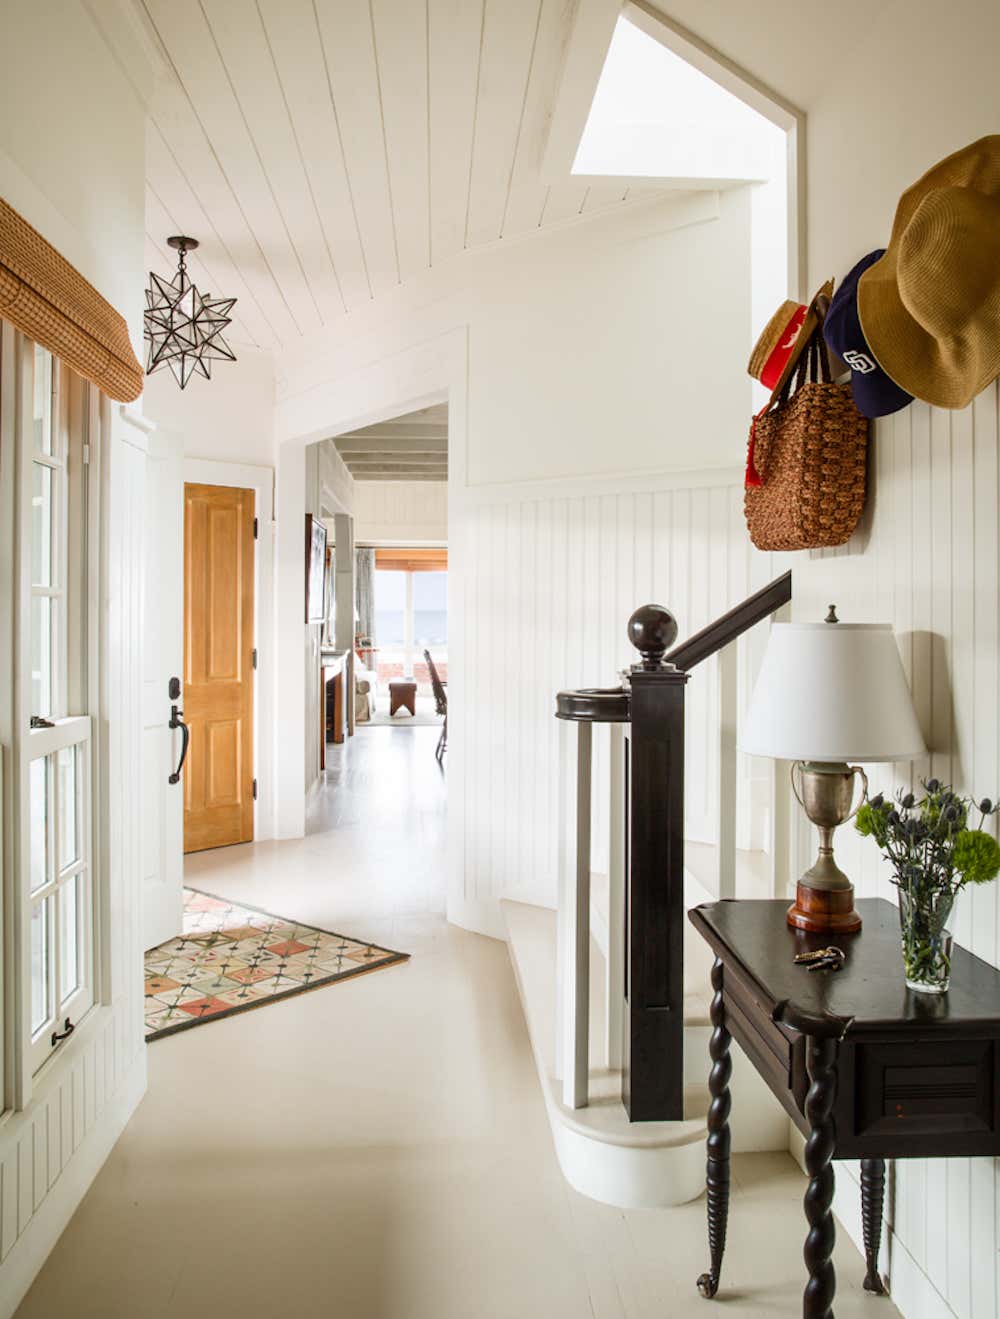 Beach Style Entry and Hall